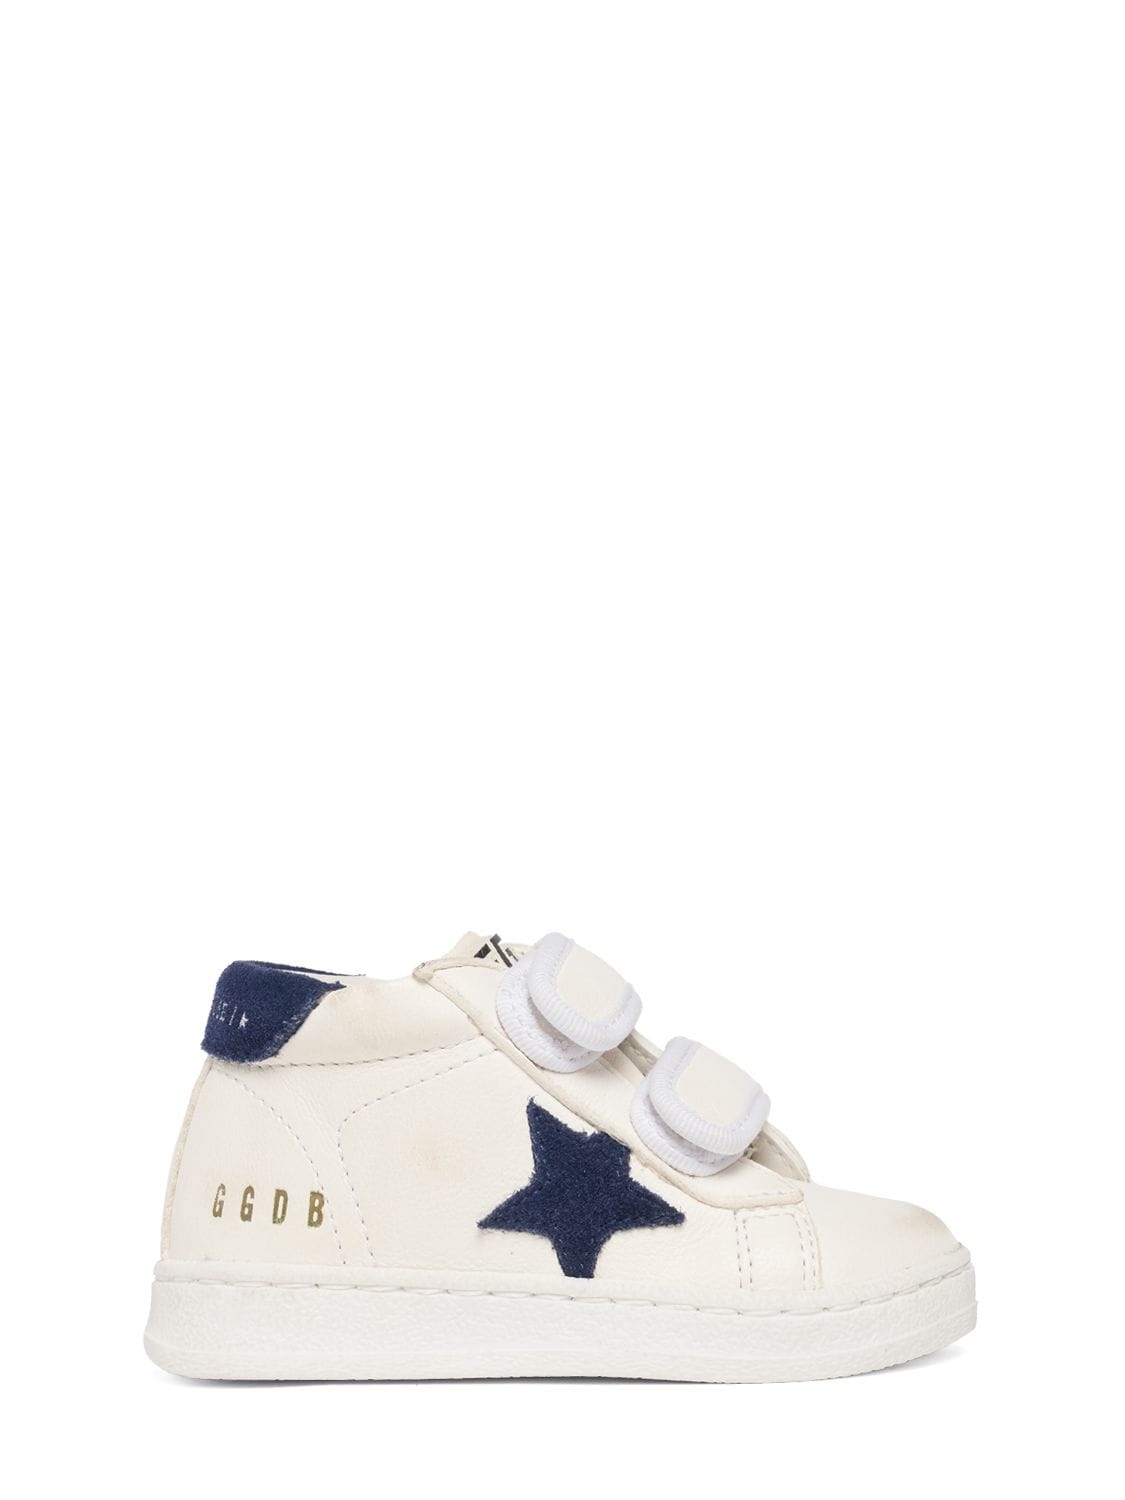 June Leather Strap Sneakers